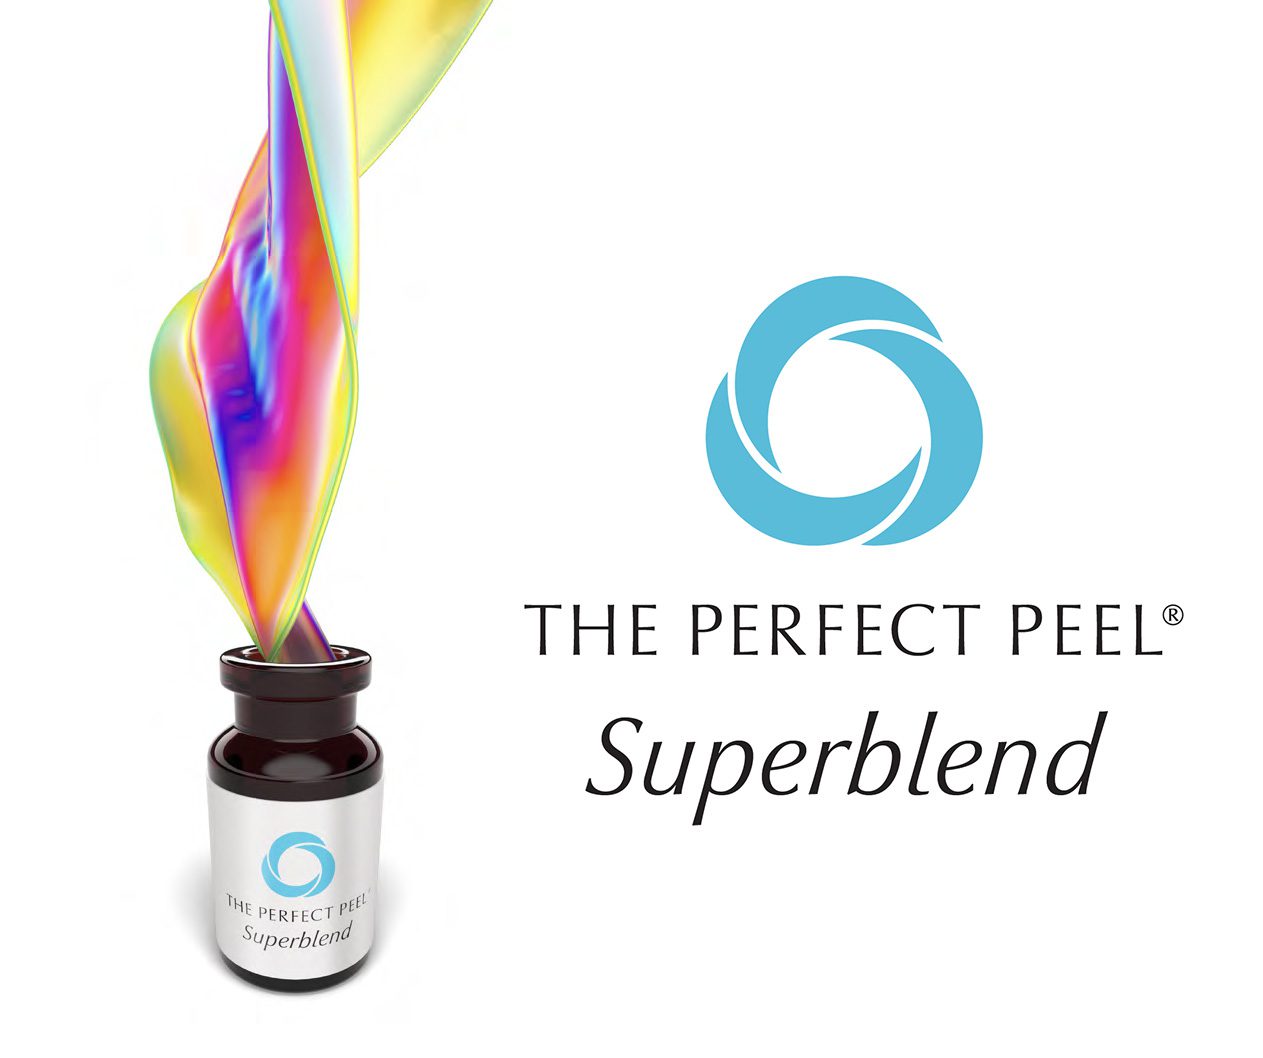 THE PERFECT PEEL® SUPERBLEND